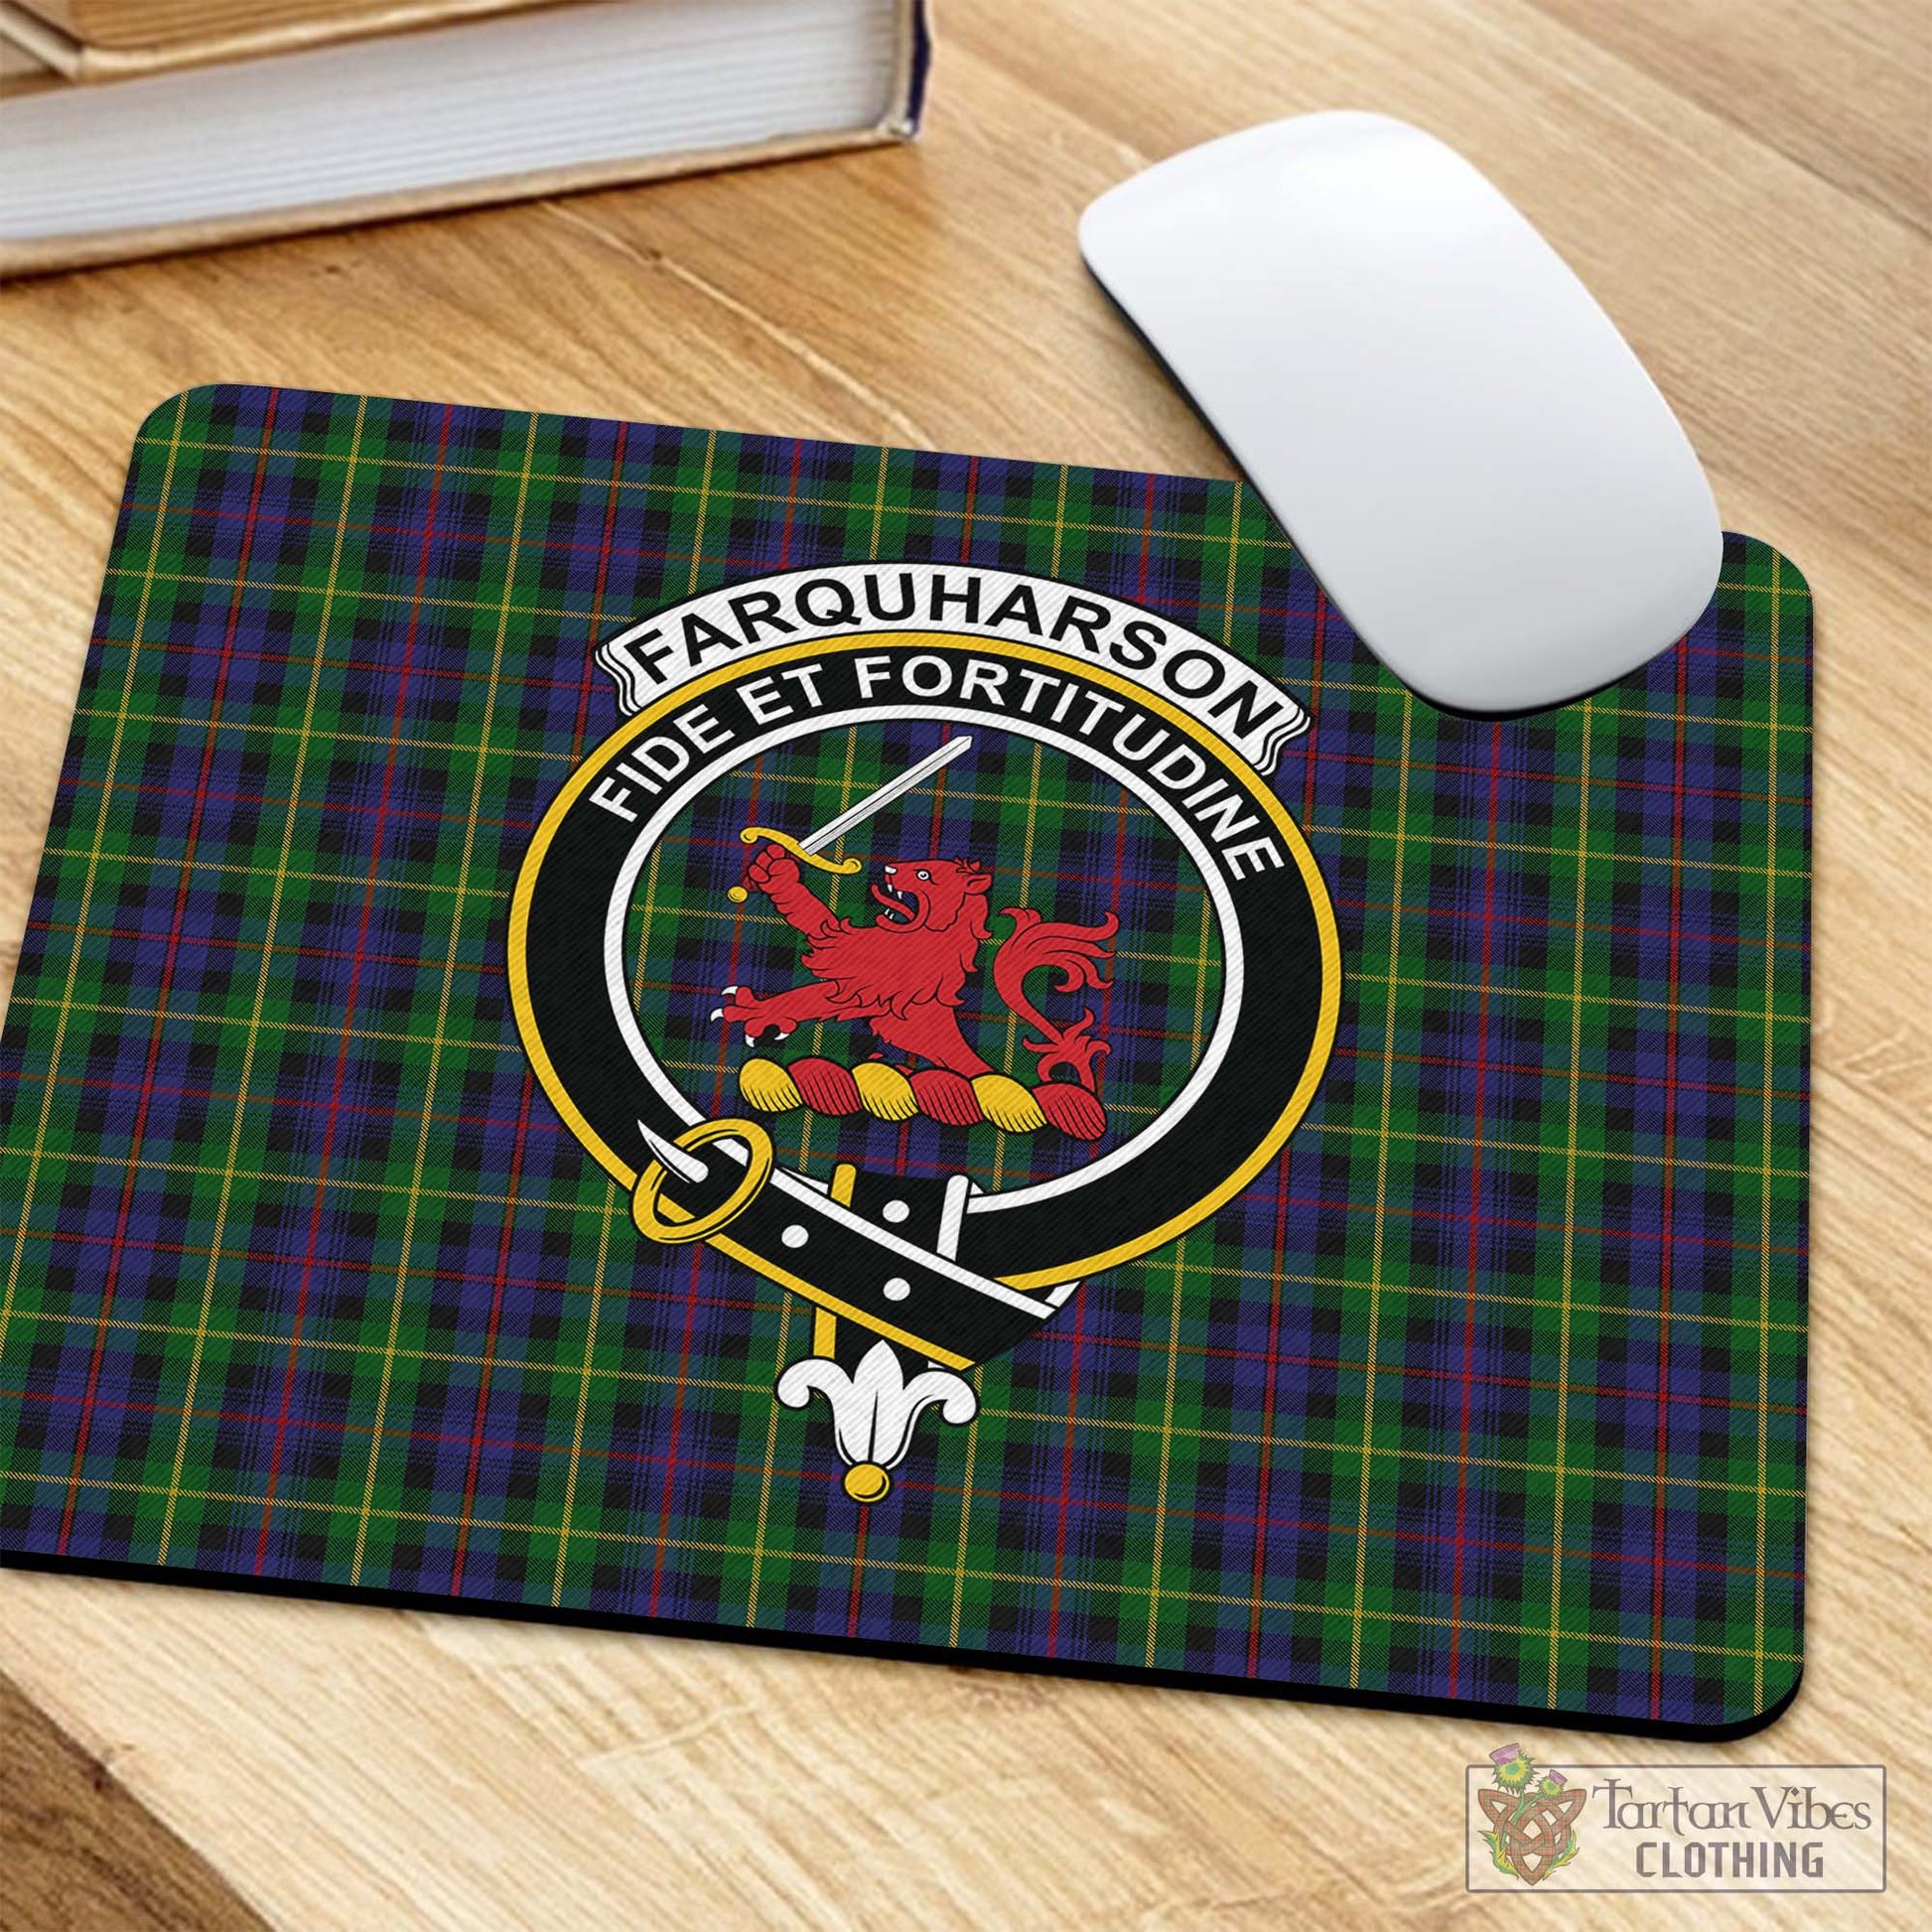 Tartan Vibes Clothing Farquharson Tartan Mouse Pad with Family Crest